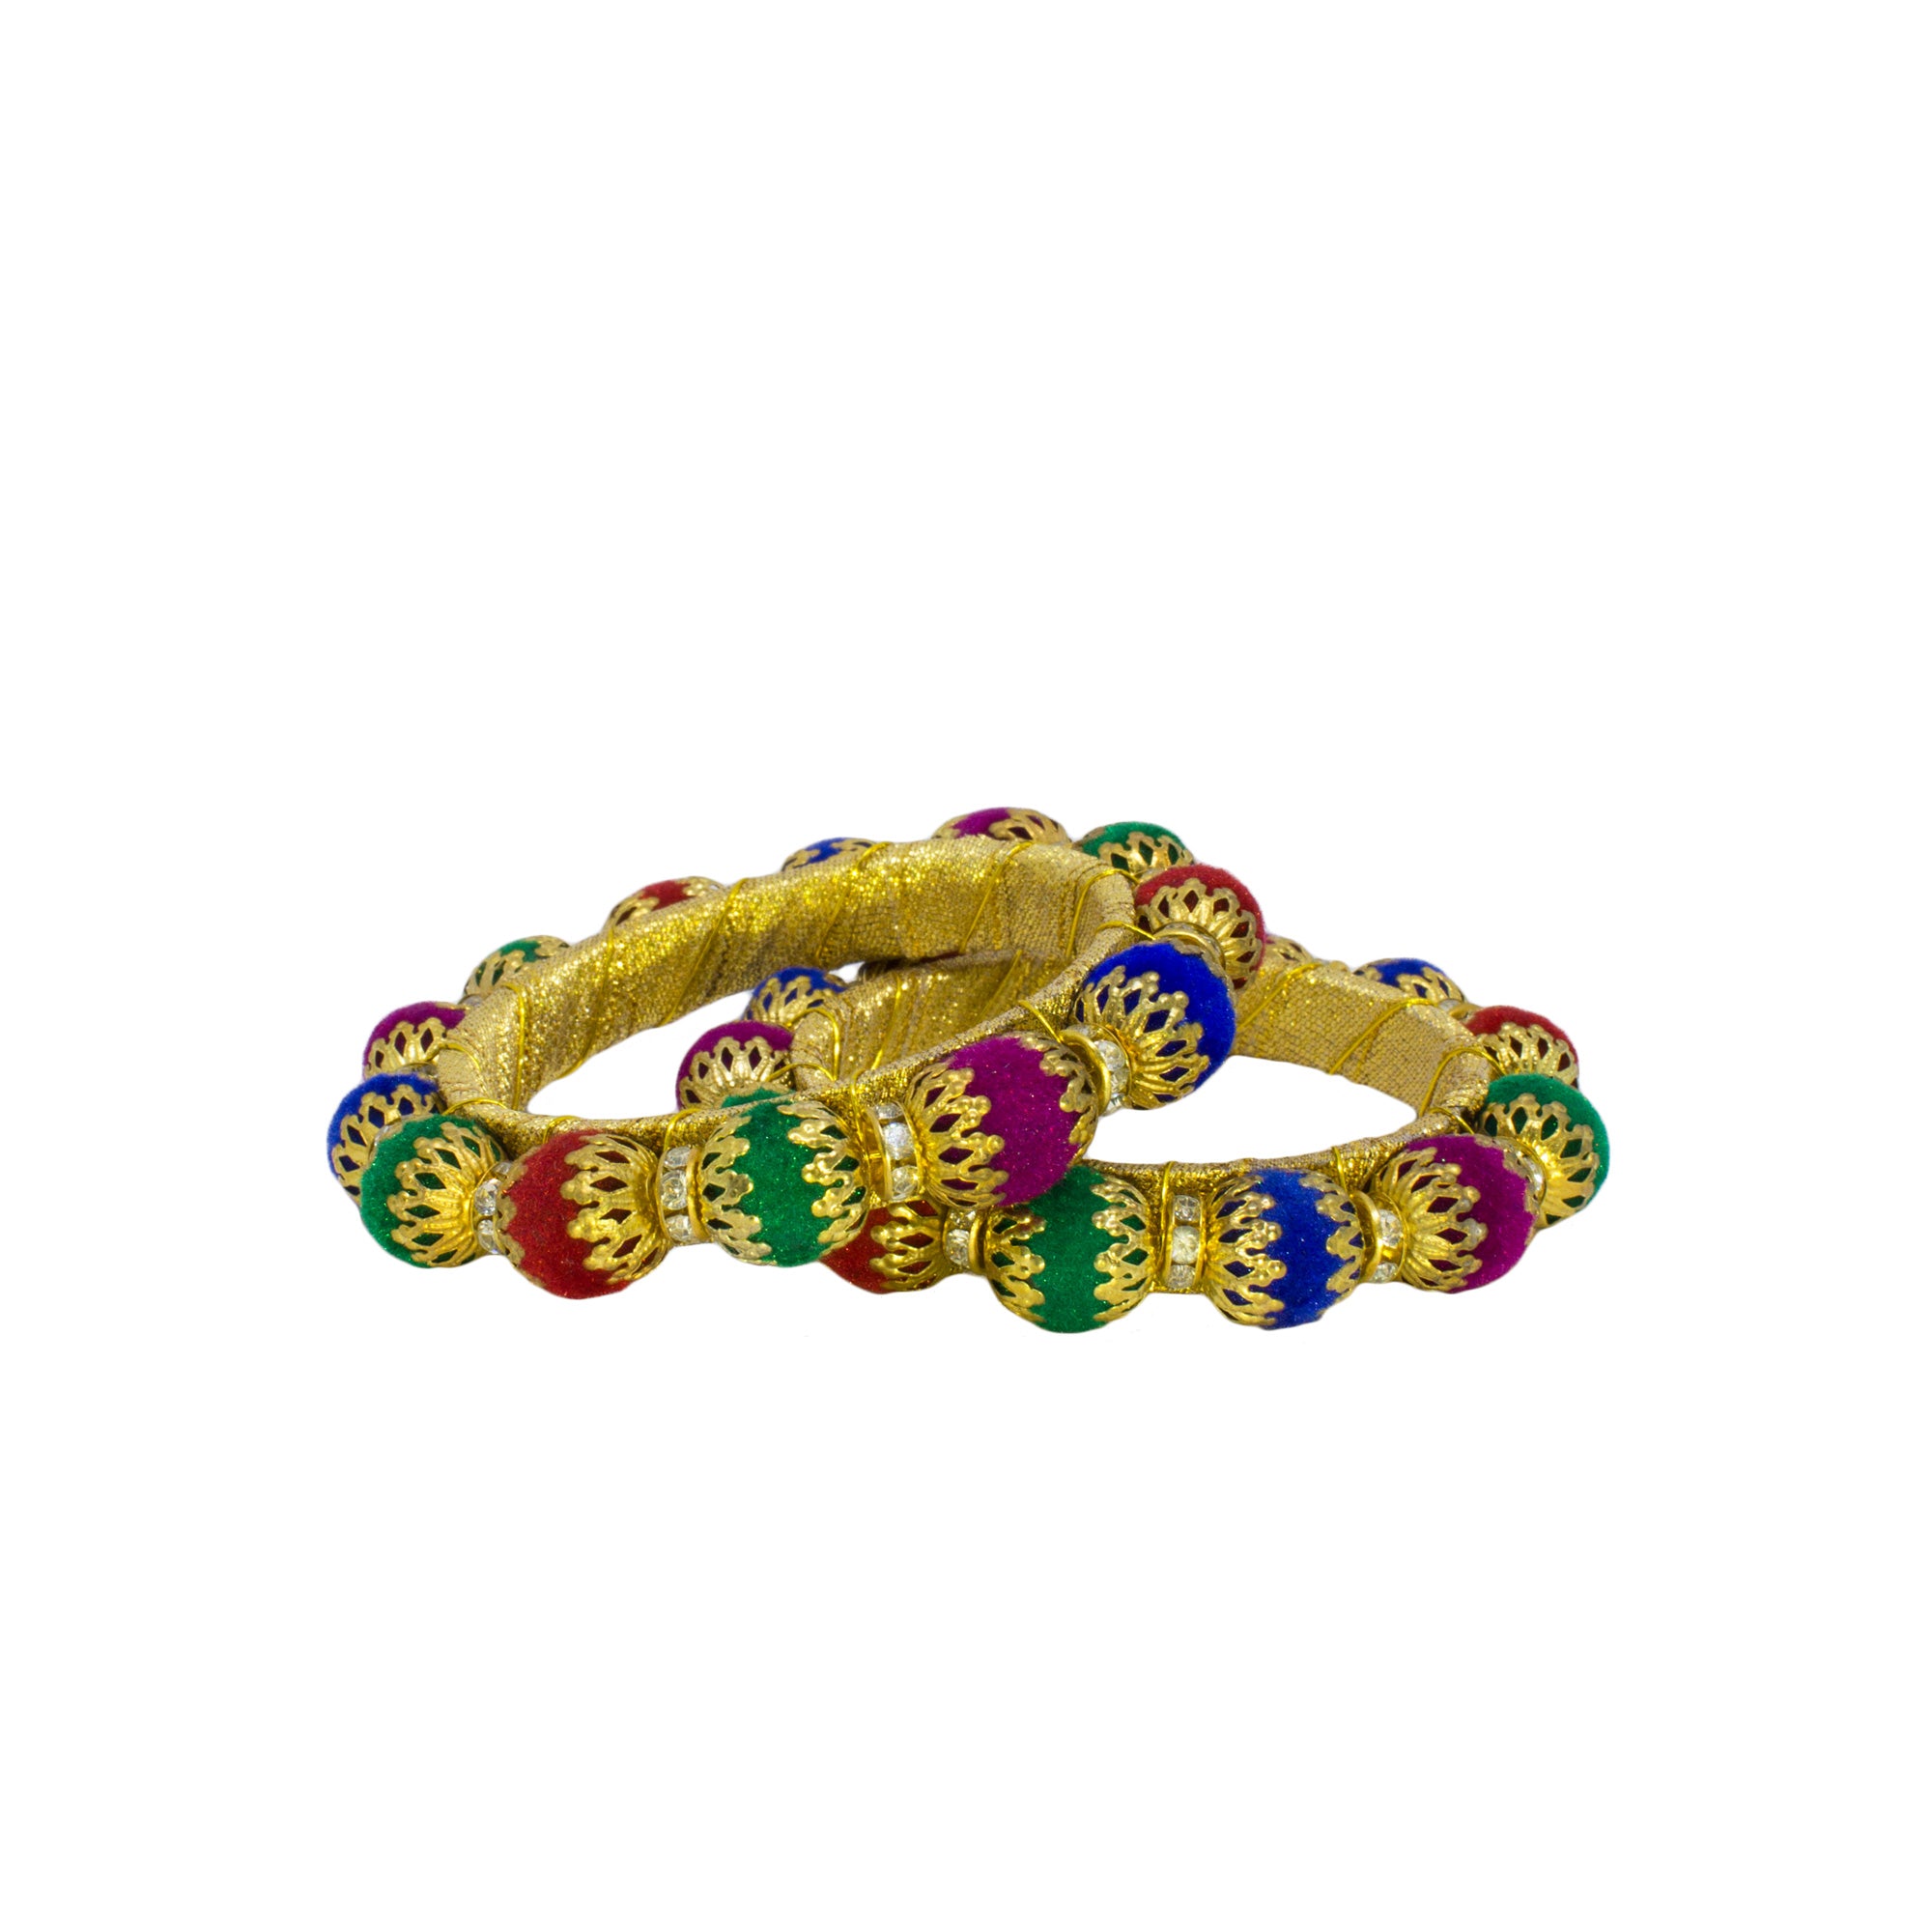 Abhinn Handicrafted Bangle Set Stringed With Multi Coloured Cotton Balls For Women 